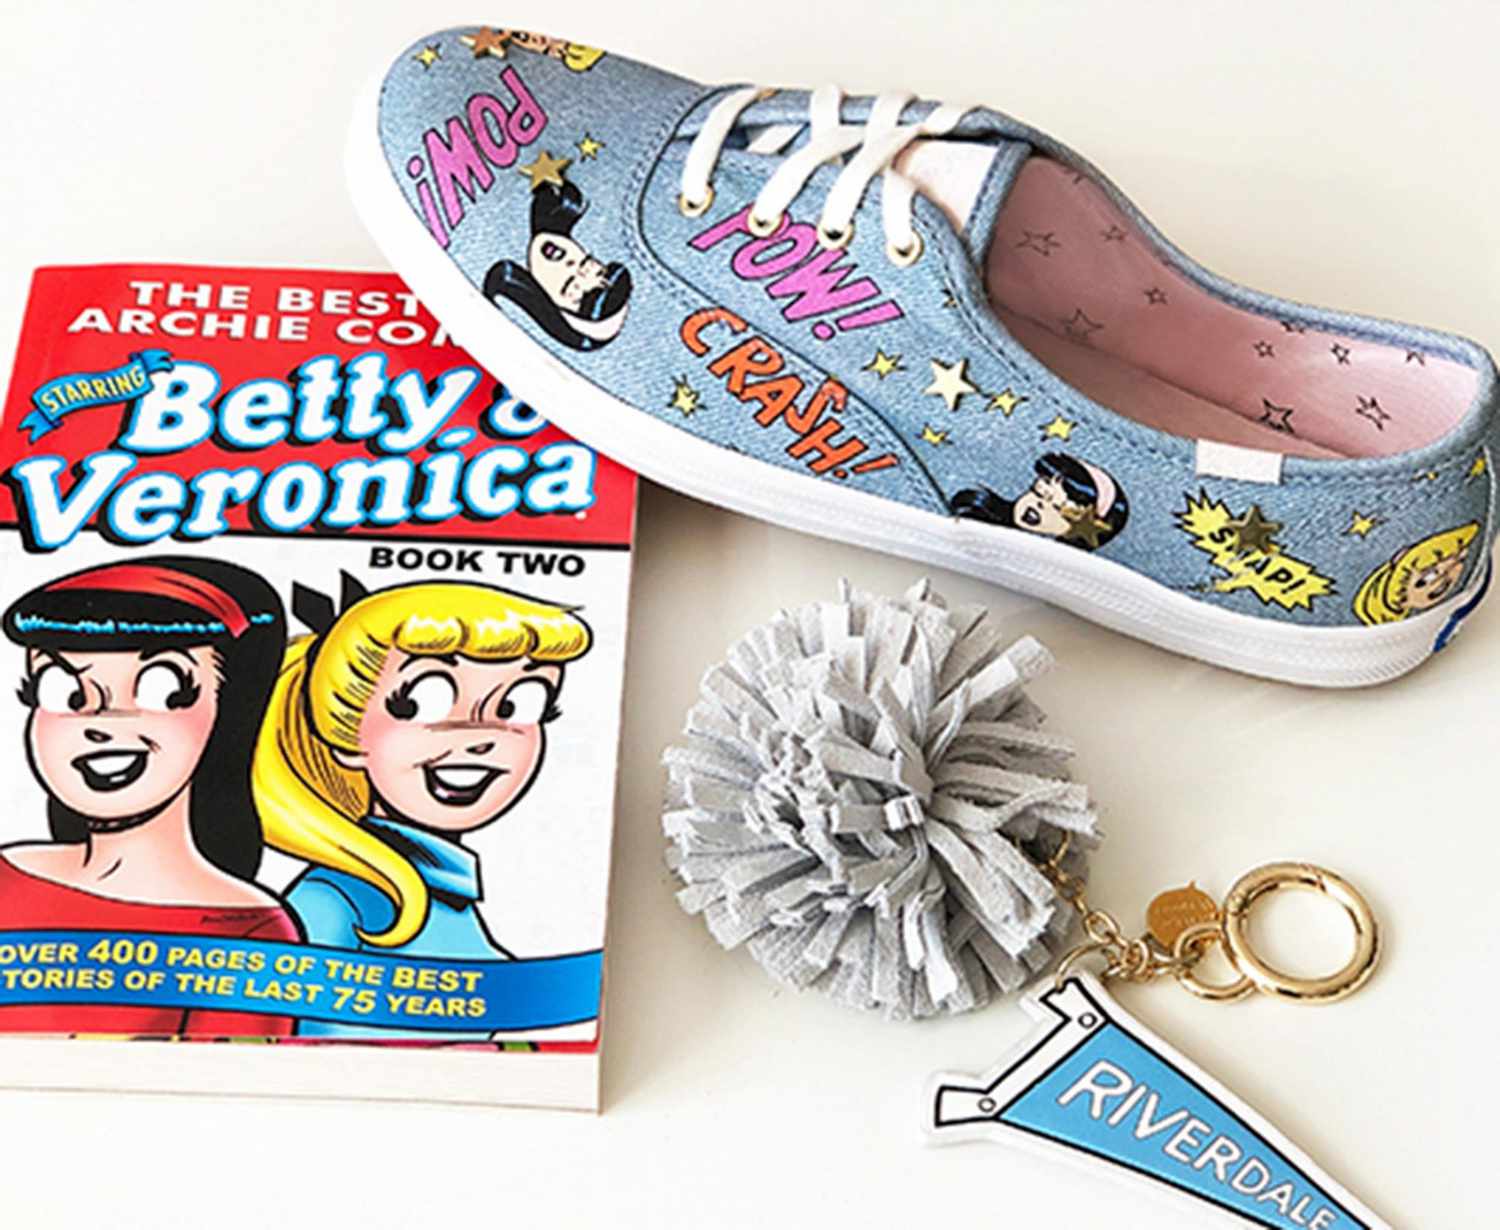 betty and veronica keds